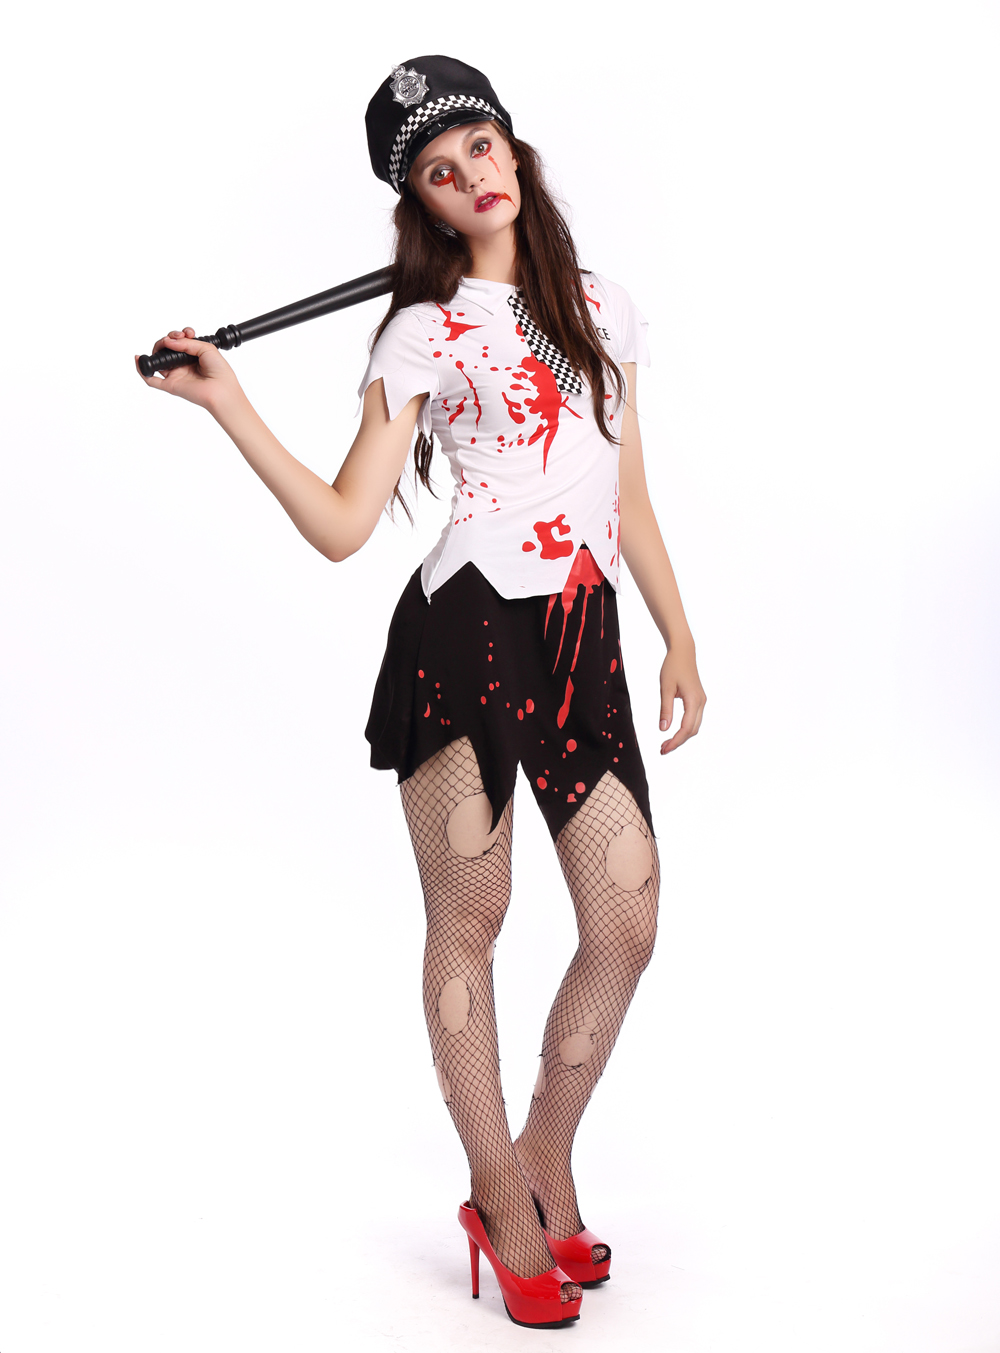 F1689 bloody women zombie police costume,it comes with hat,topwear,skirt